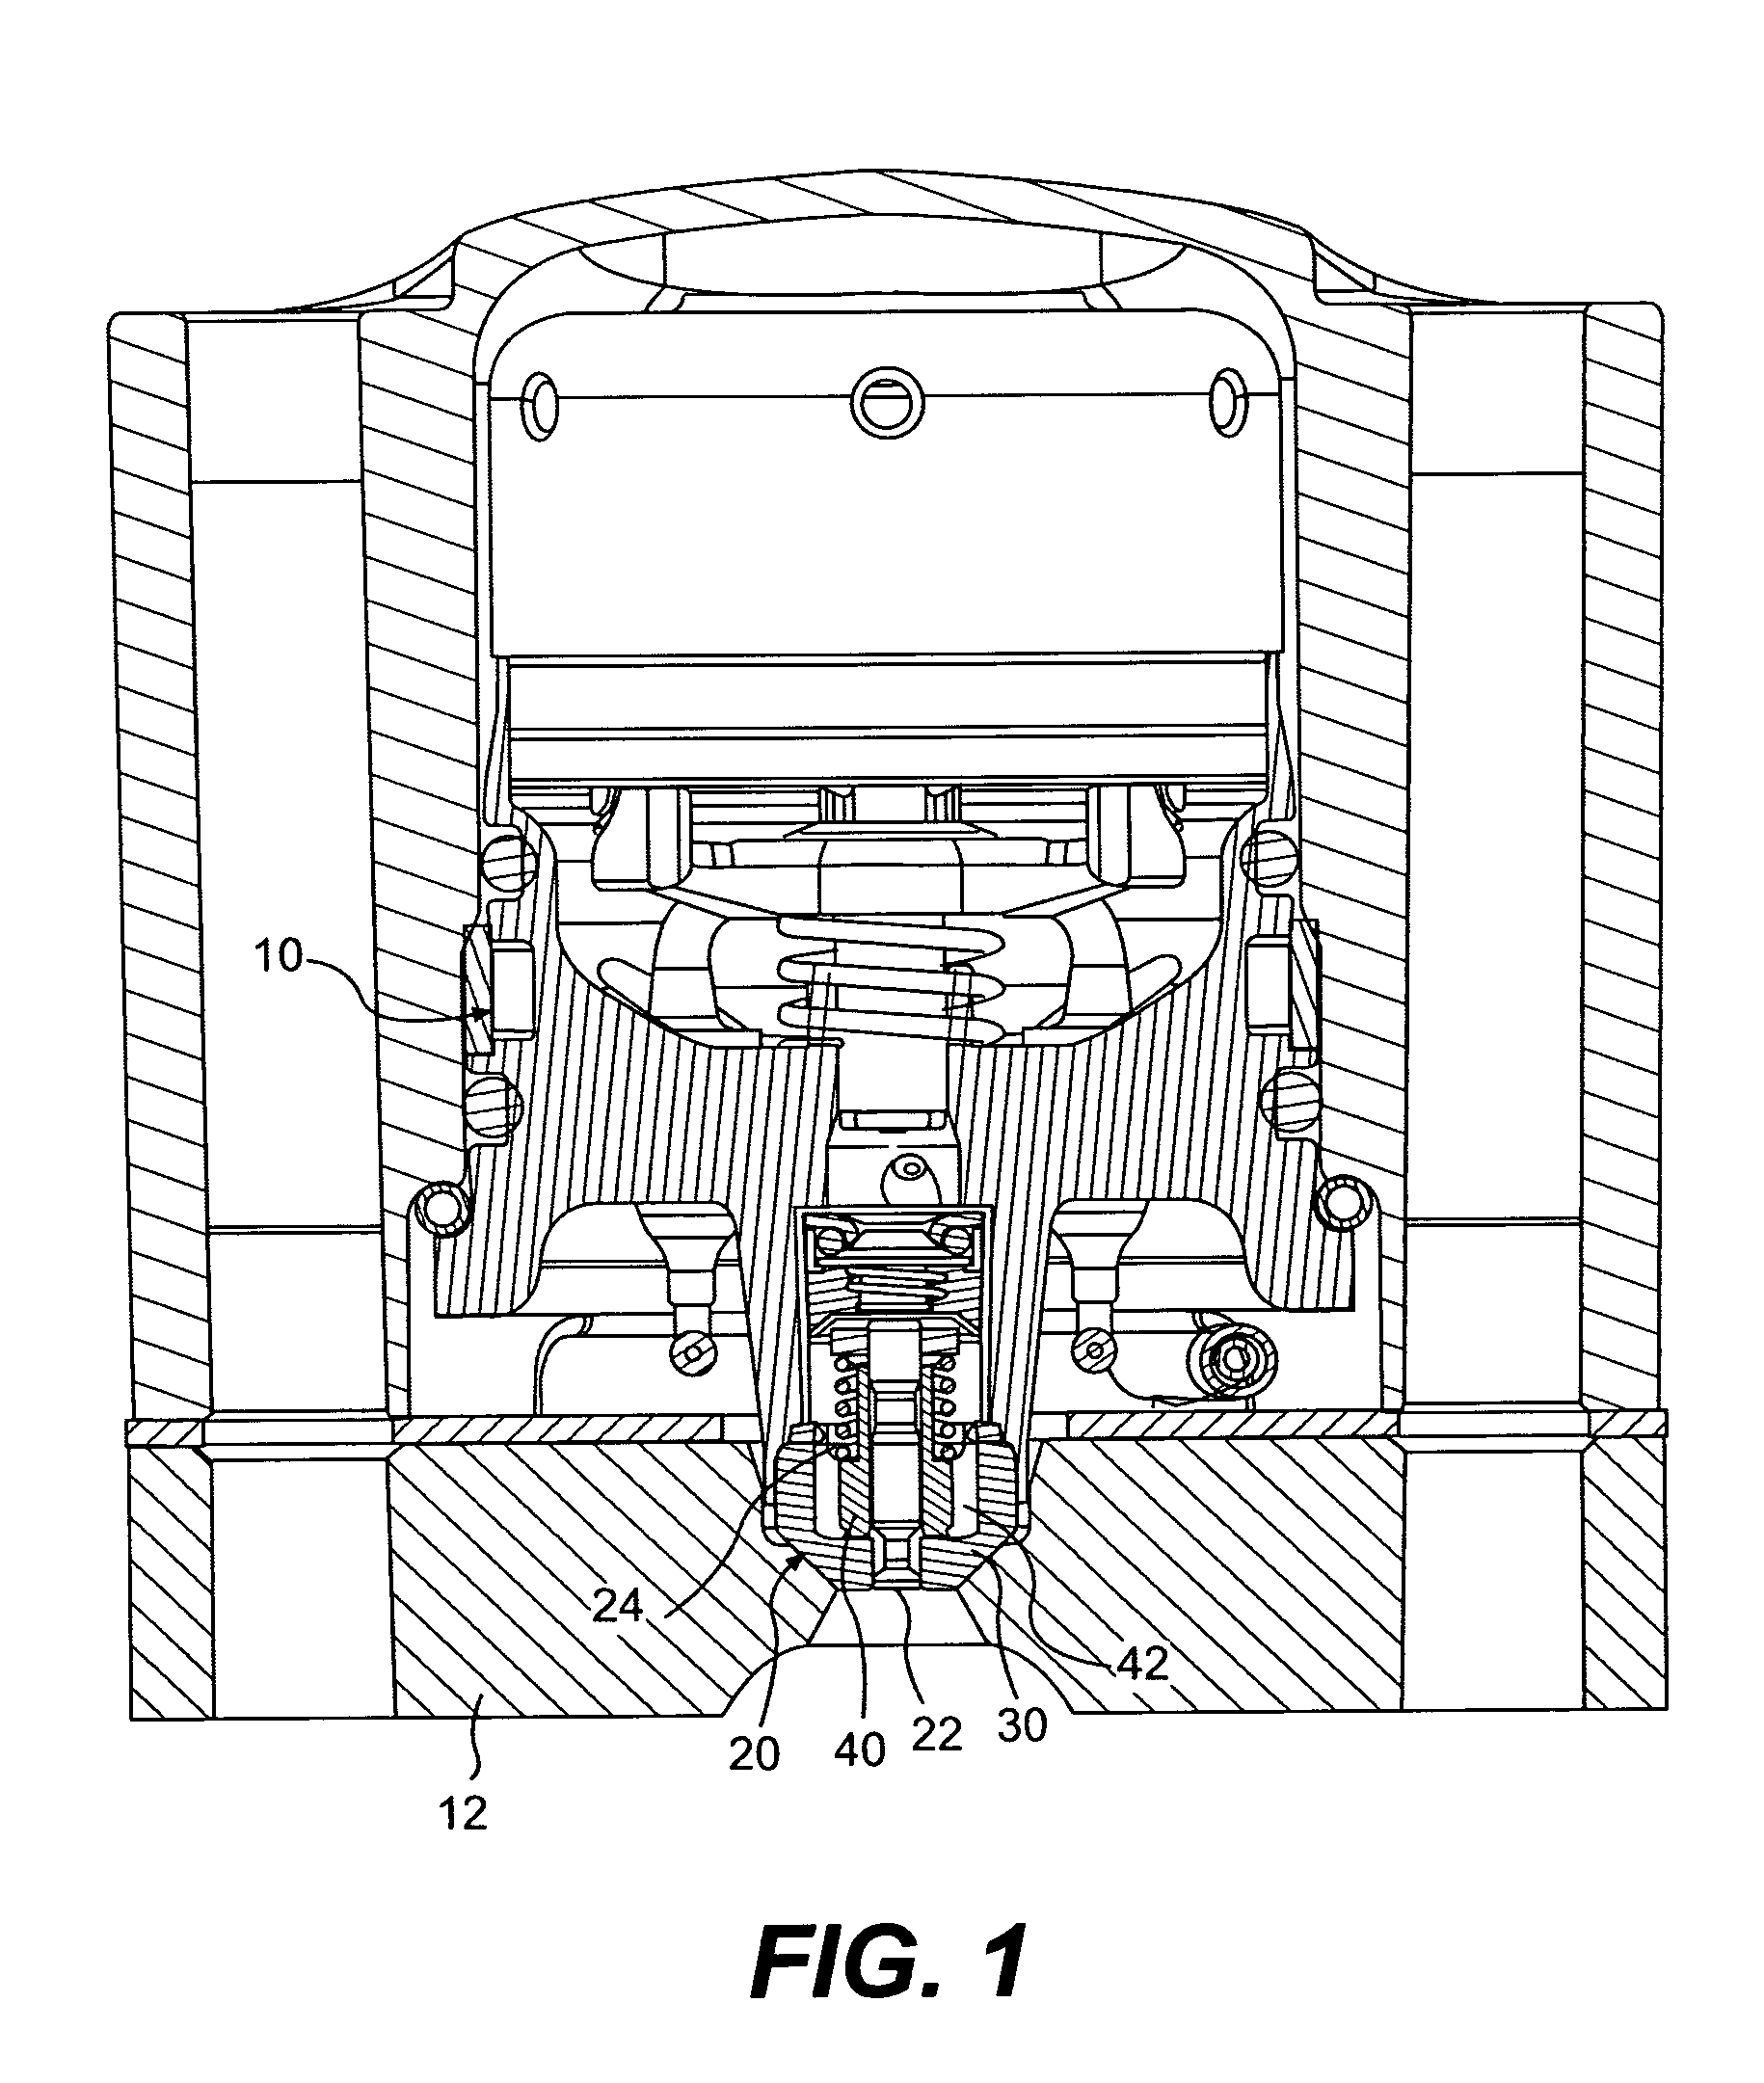 Fuel injector nozzle manufacturing method